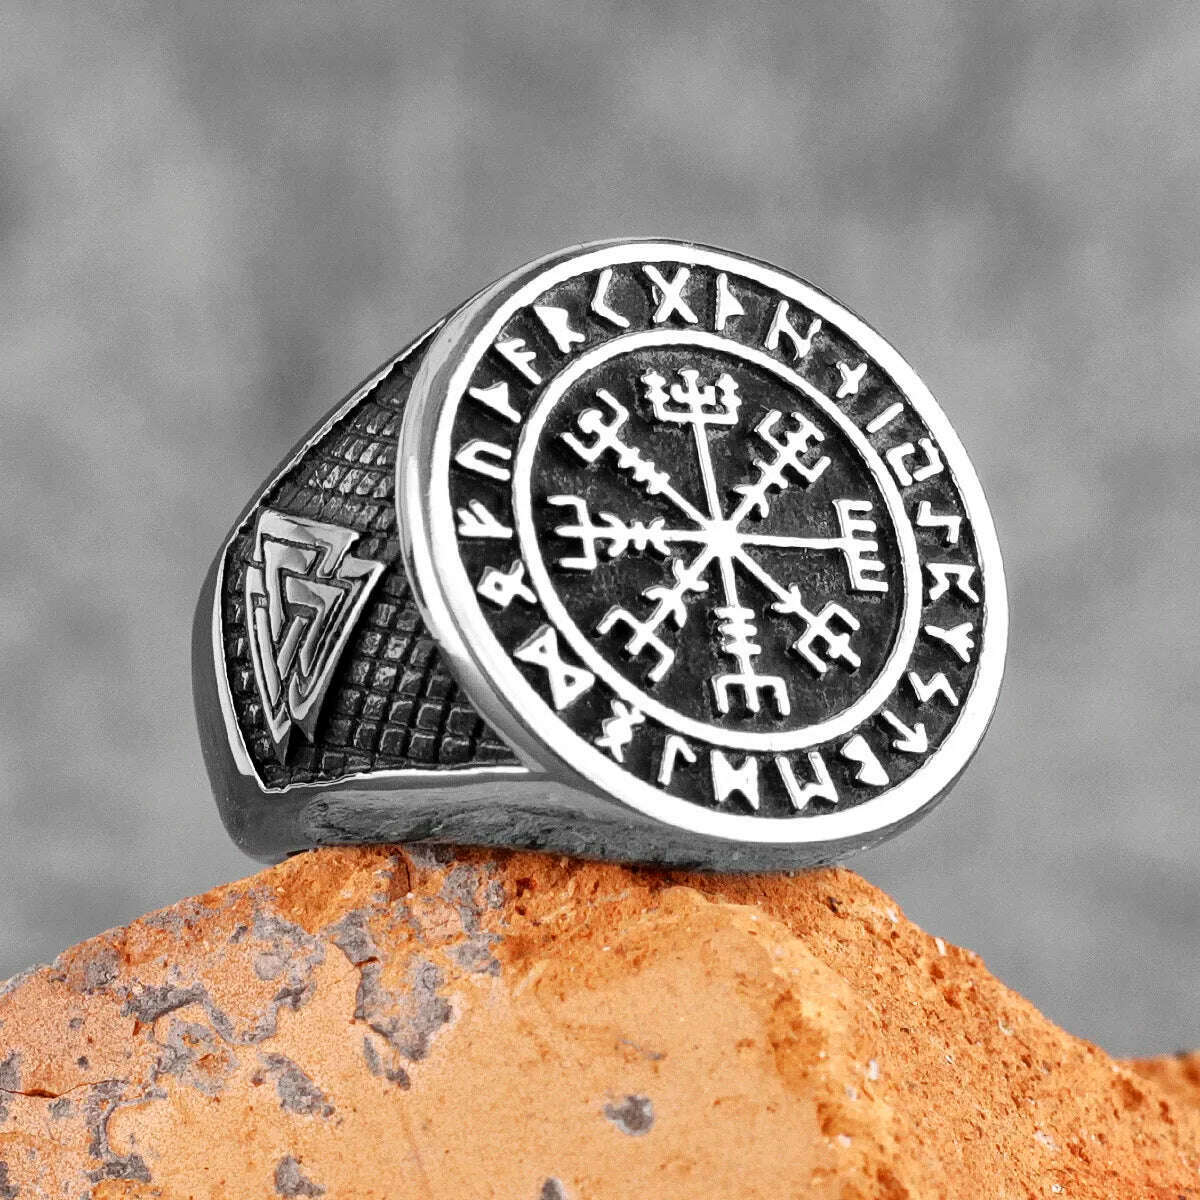 KIMLUD, Myth Odin Triangle Symbol Viking Stainless Steel Mens Rings Vintage Charm for Male Boyfriend Jewelry Creativity Gift Wholesale, KIMLUD Womens Clothes